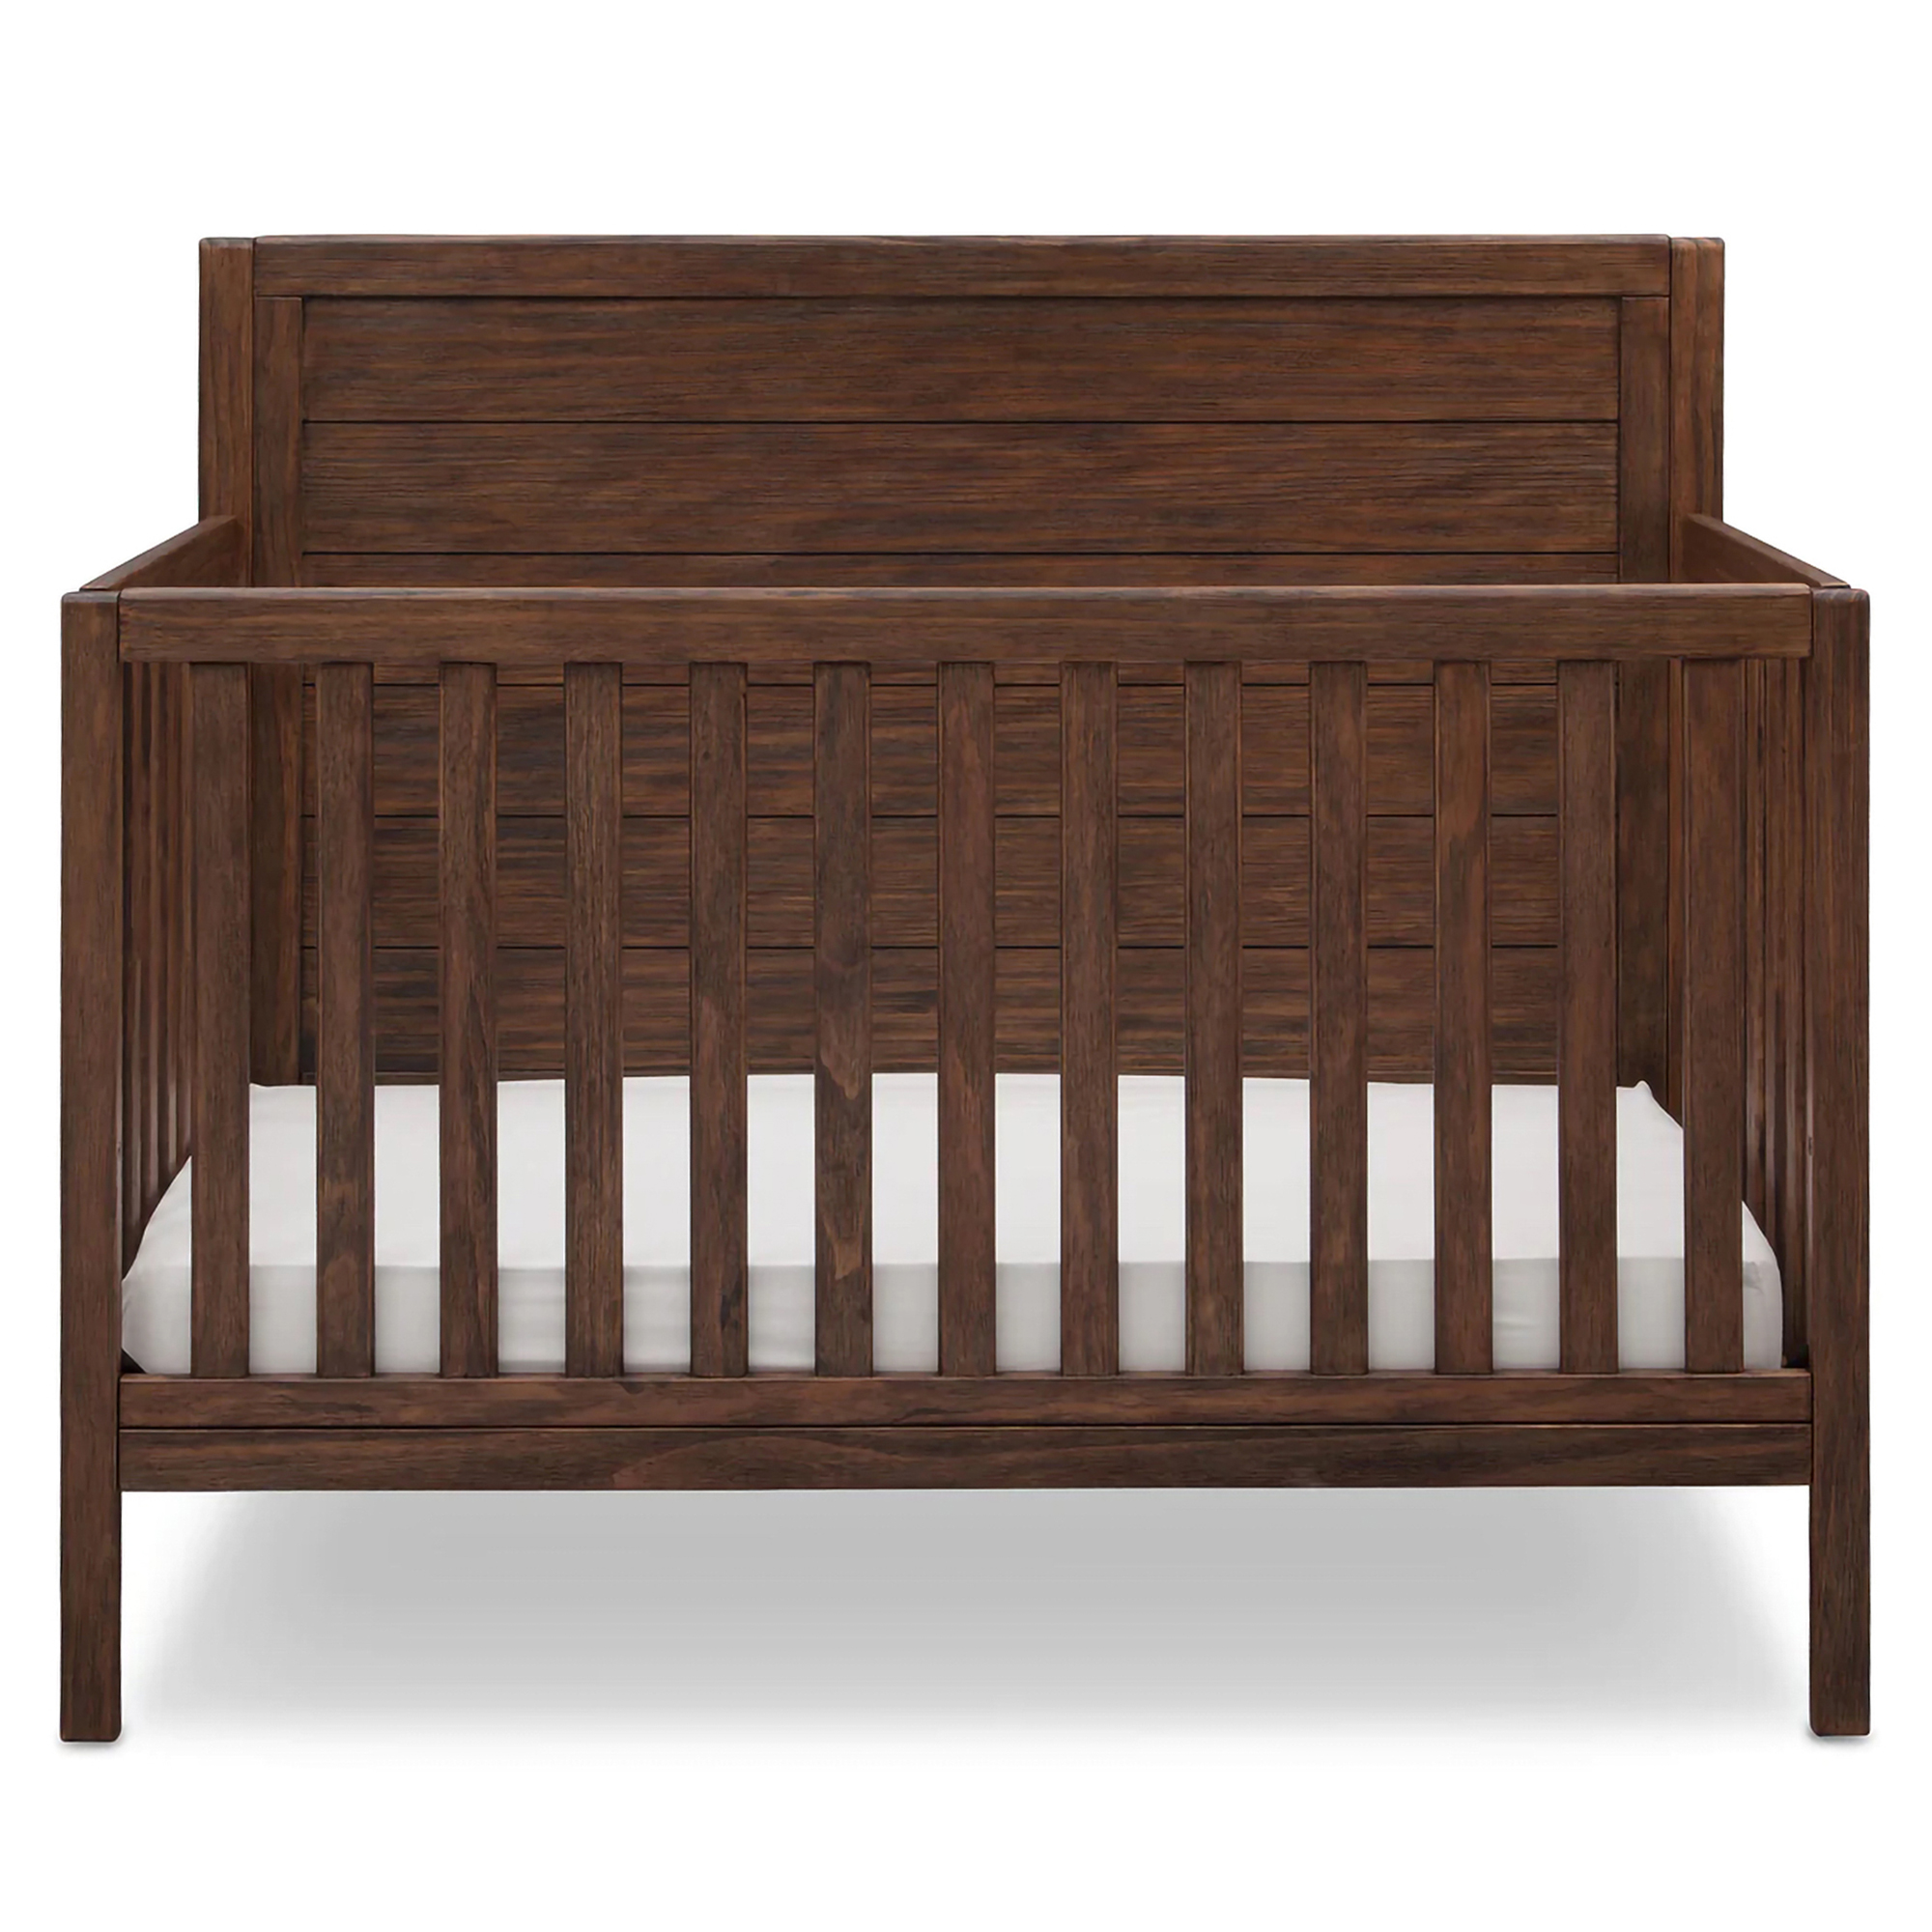 Delta Children Cambridge Mix and Match 4-in-1 Convertible Crib, Greenguard Gold Certified, Rustic Oak - image 1 of 12